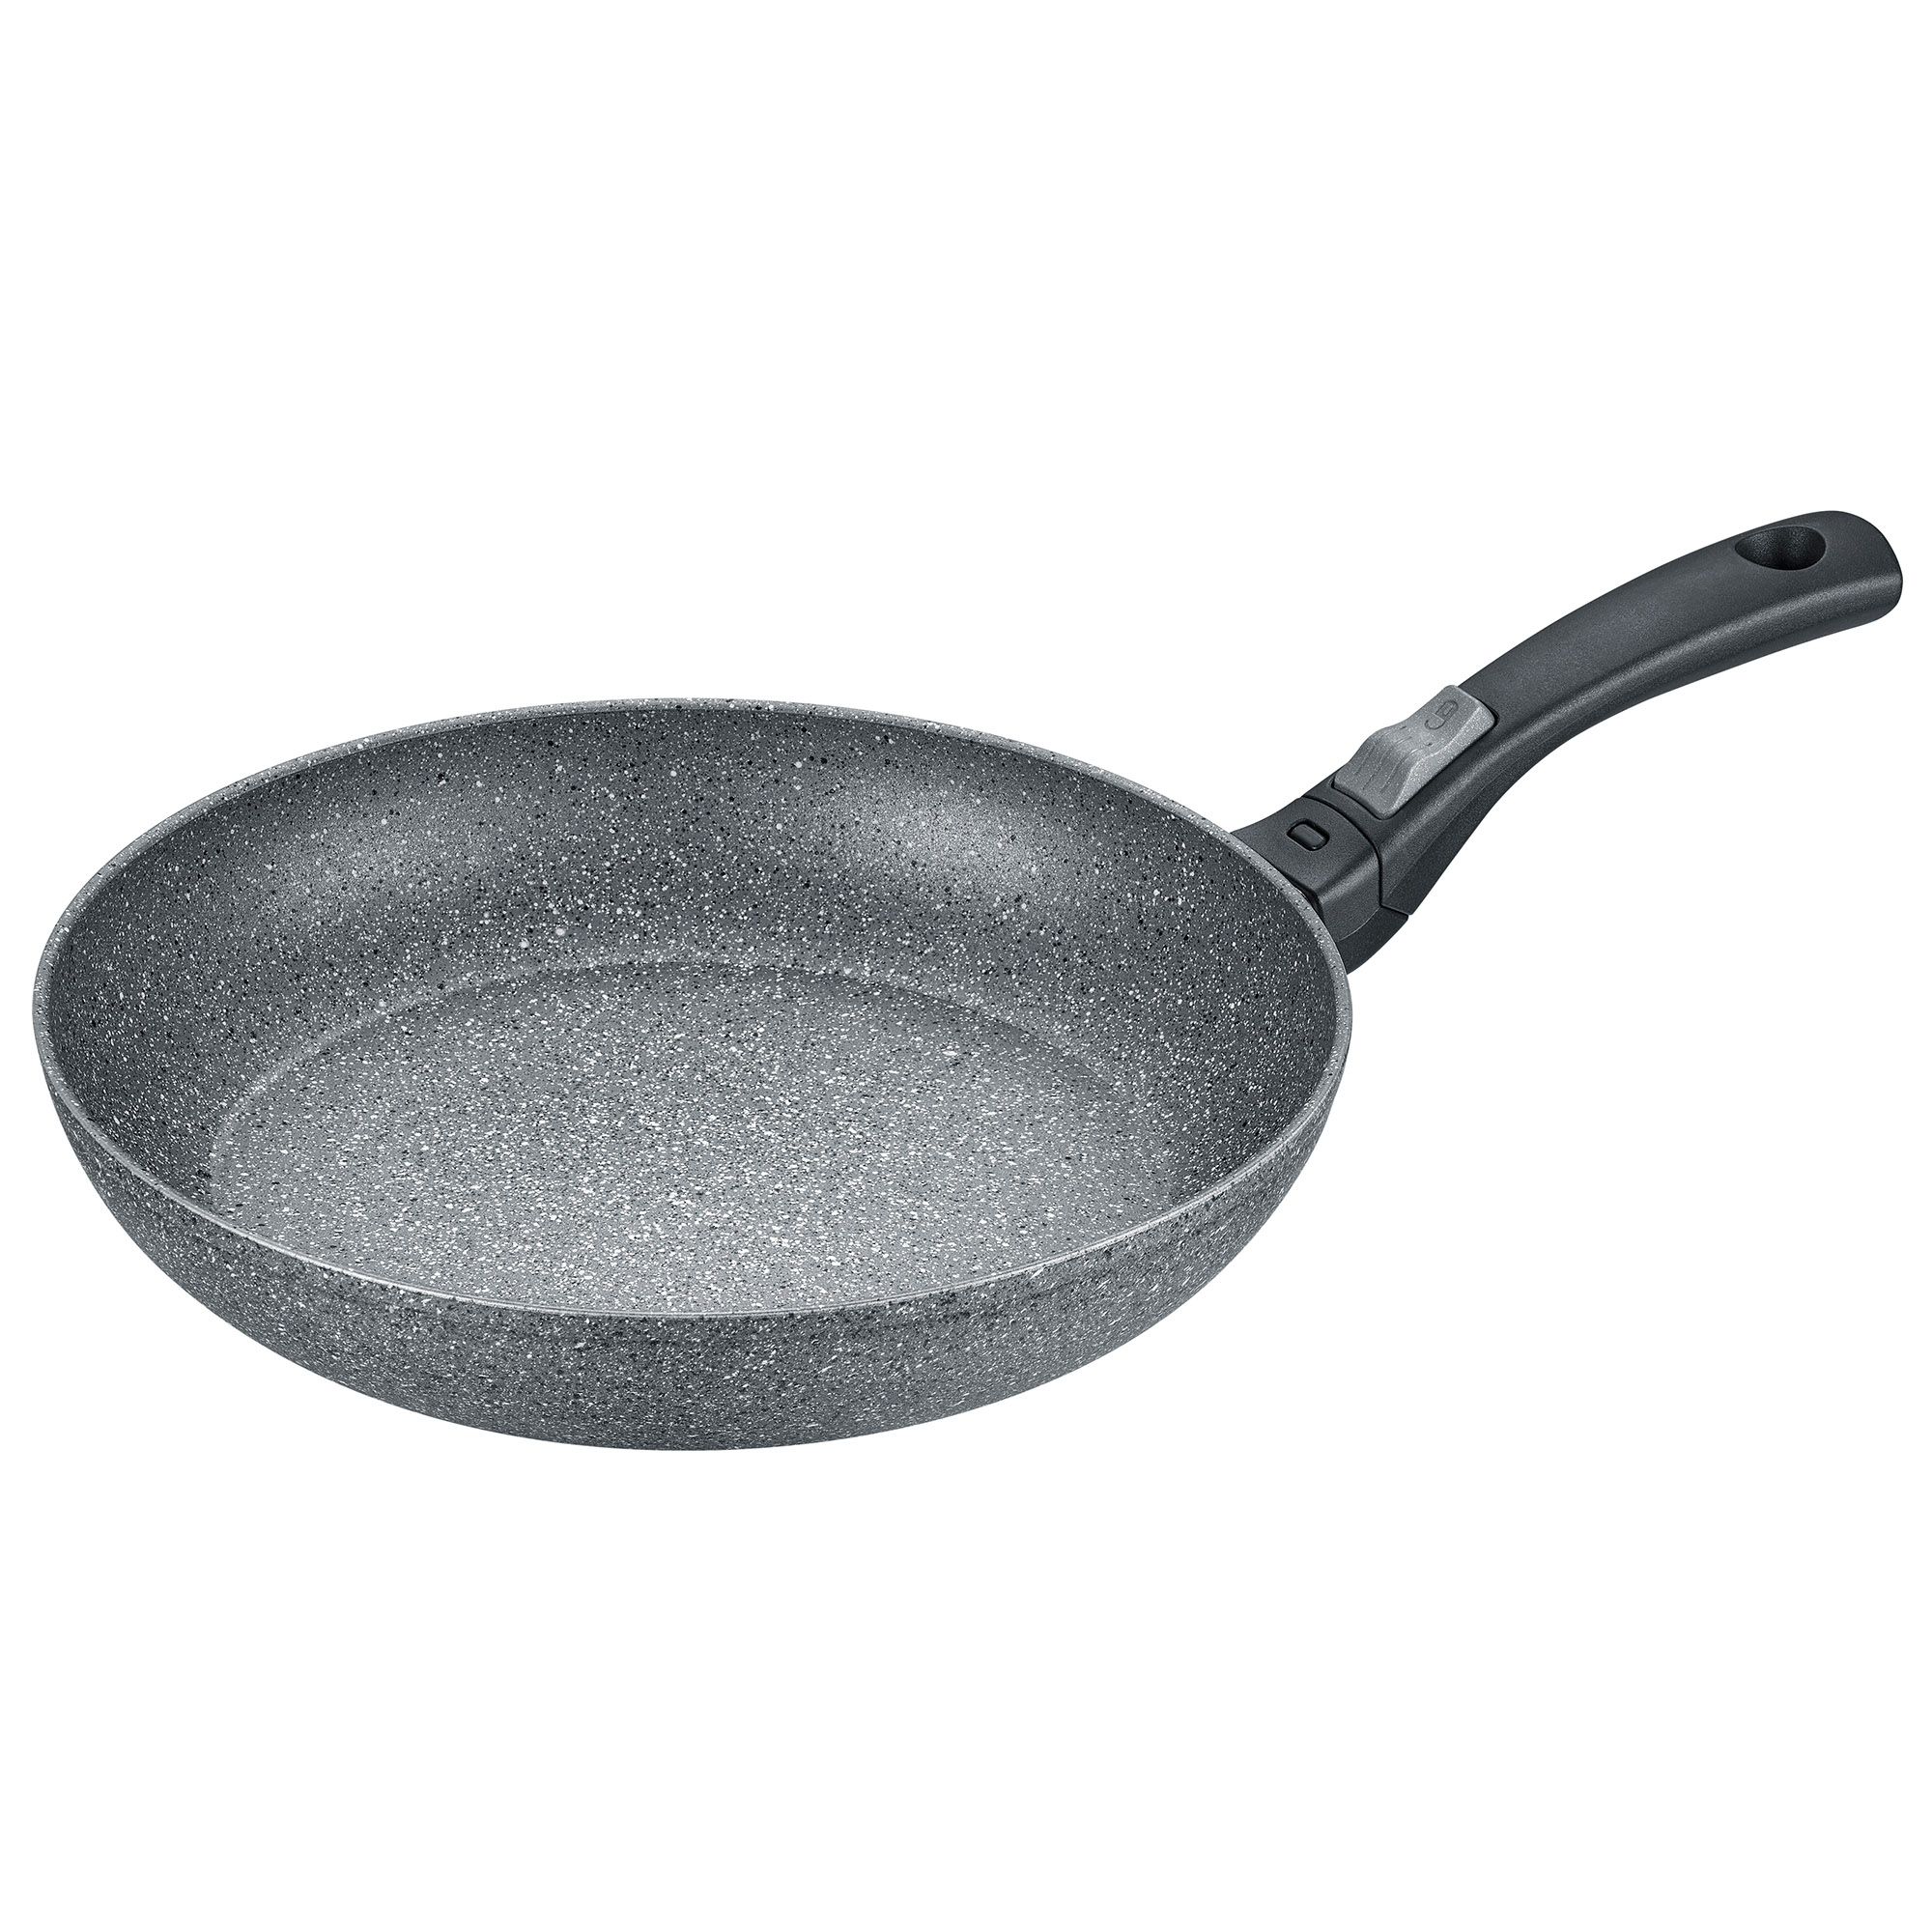 BERNDES frying pan ALU CLICK BAKING pans COOKING Englisch | | Frying | 28 INDUCTION | removable cm Frying handle with 1a-Neuware 